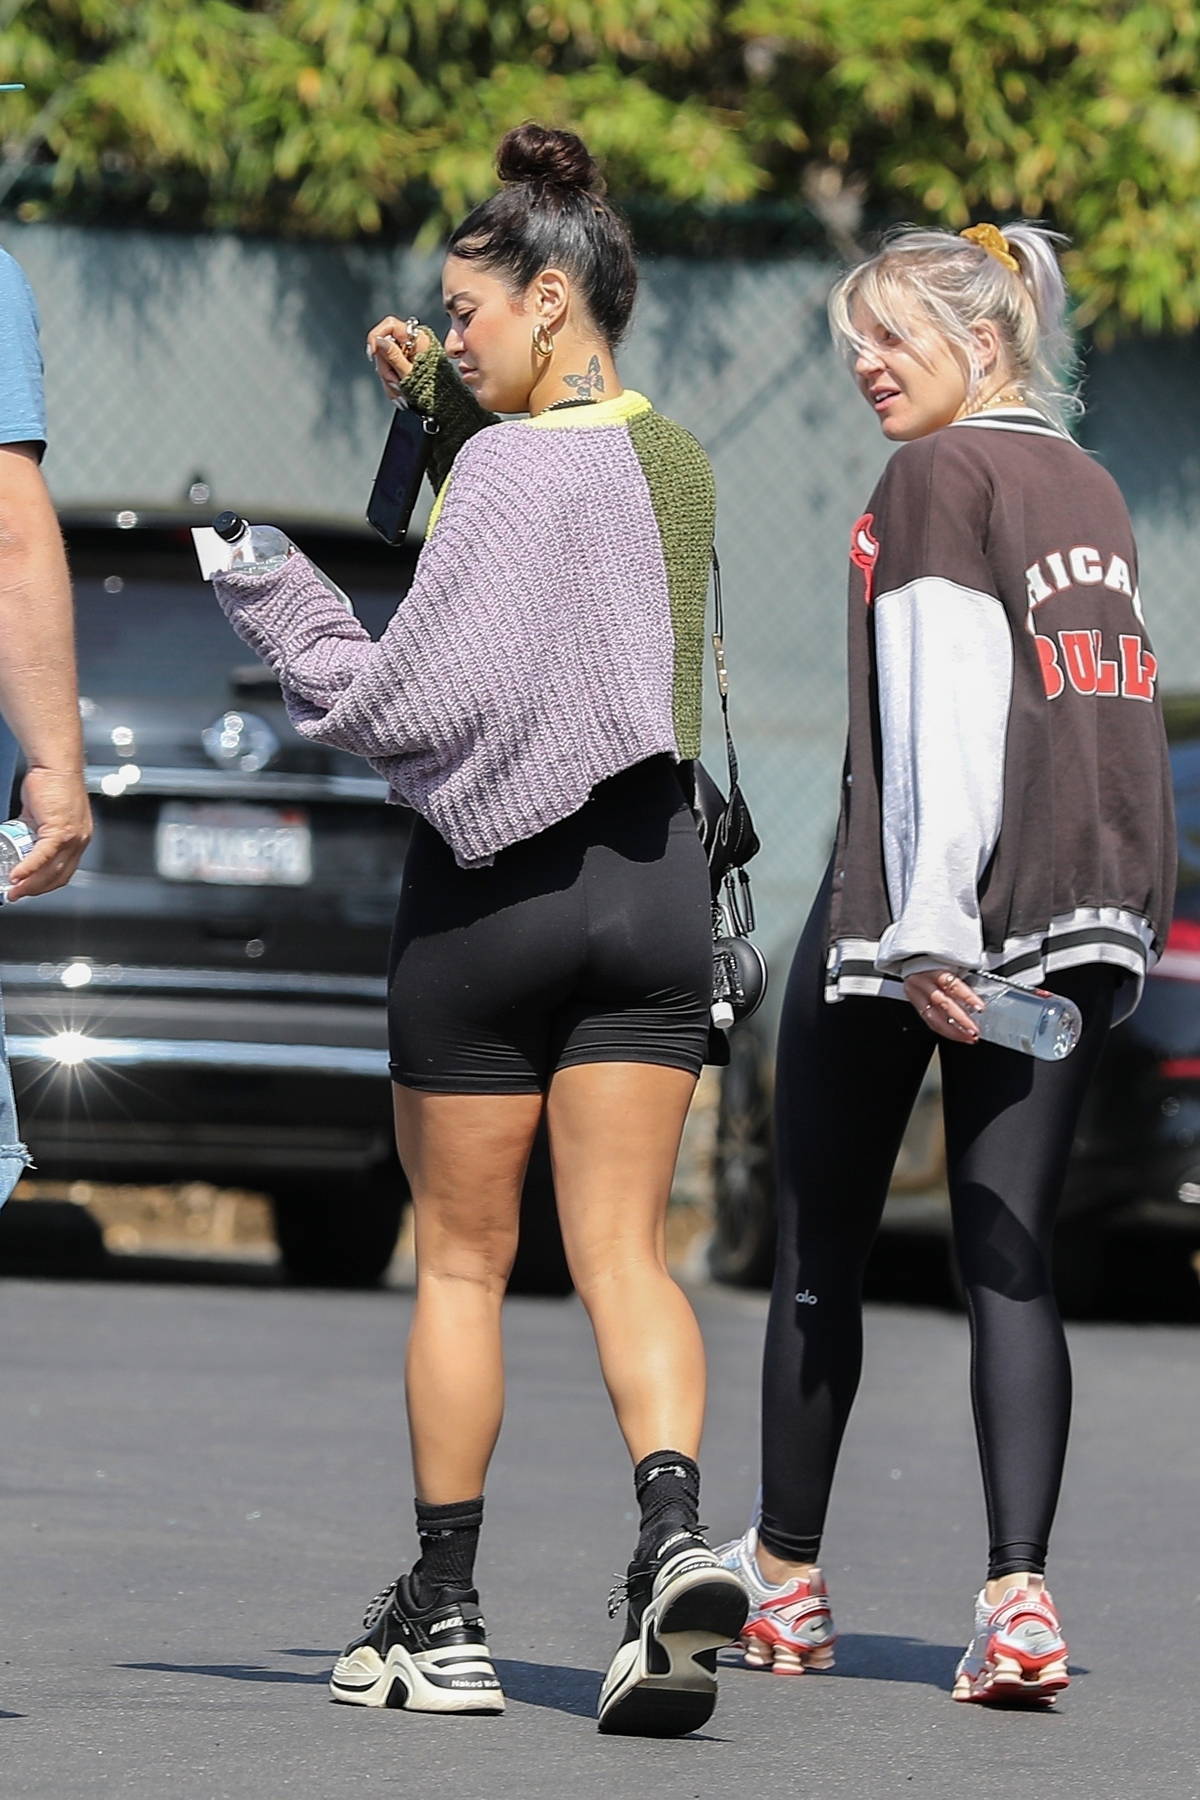 vanessa hudgens sports black workout top and legging shorts as she